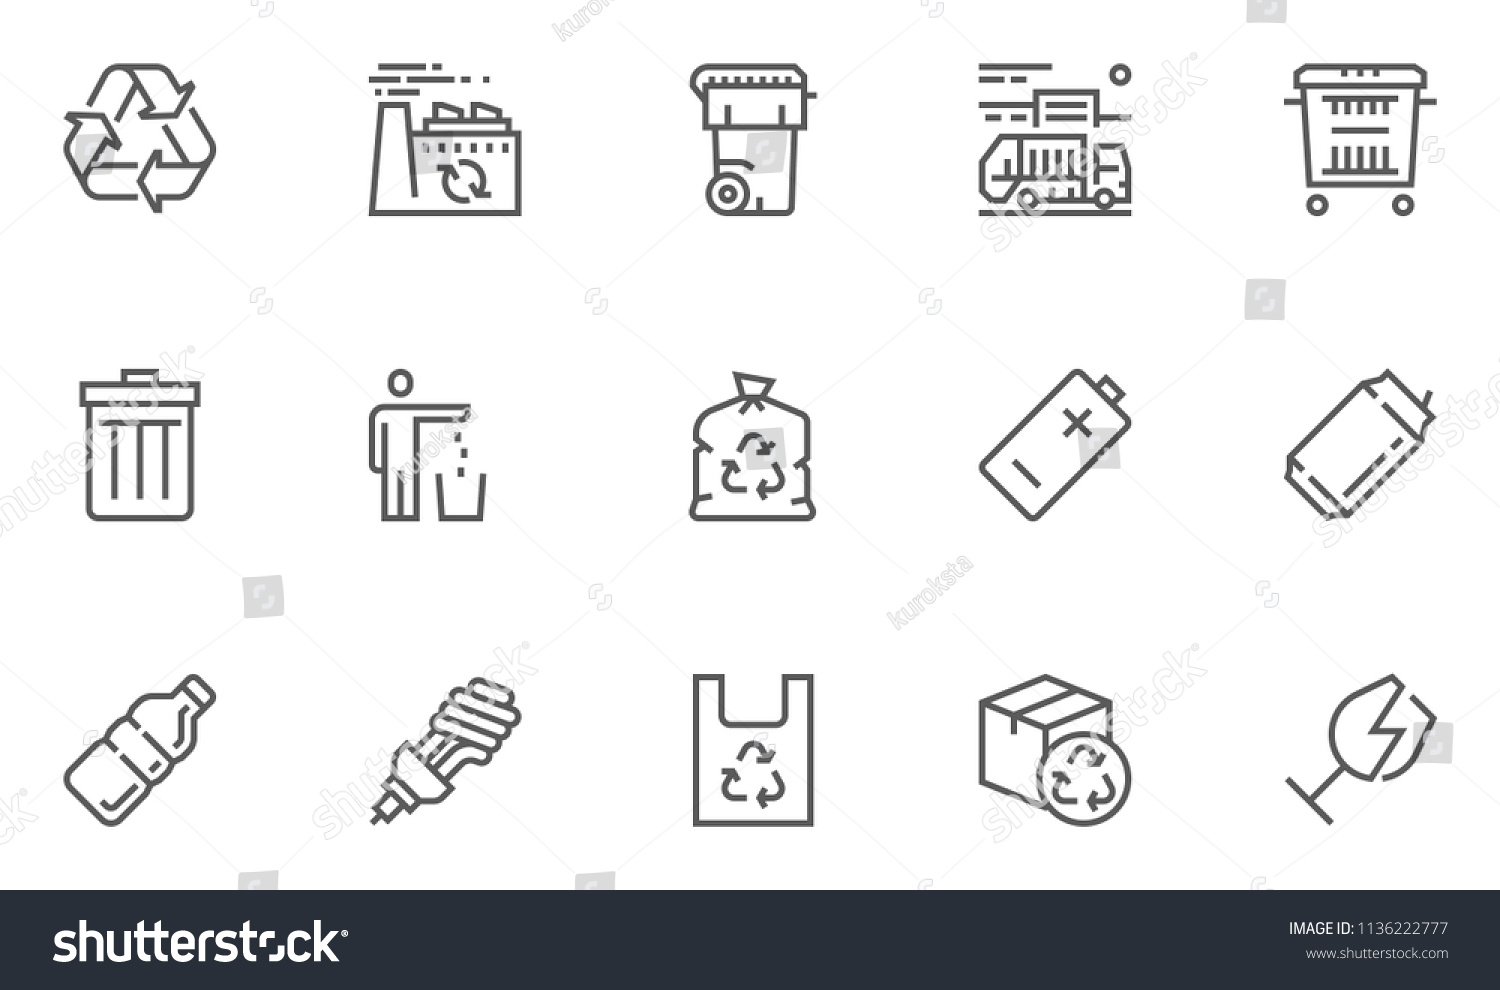 Garbage Vector Line Icons Set. Trash, Organic Waste, Plastic, Aluminium Can, Pollution, Recycle Plant. Editable Stroke. 48x48 Pixel Perfect. #1136222777